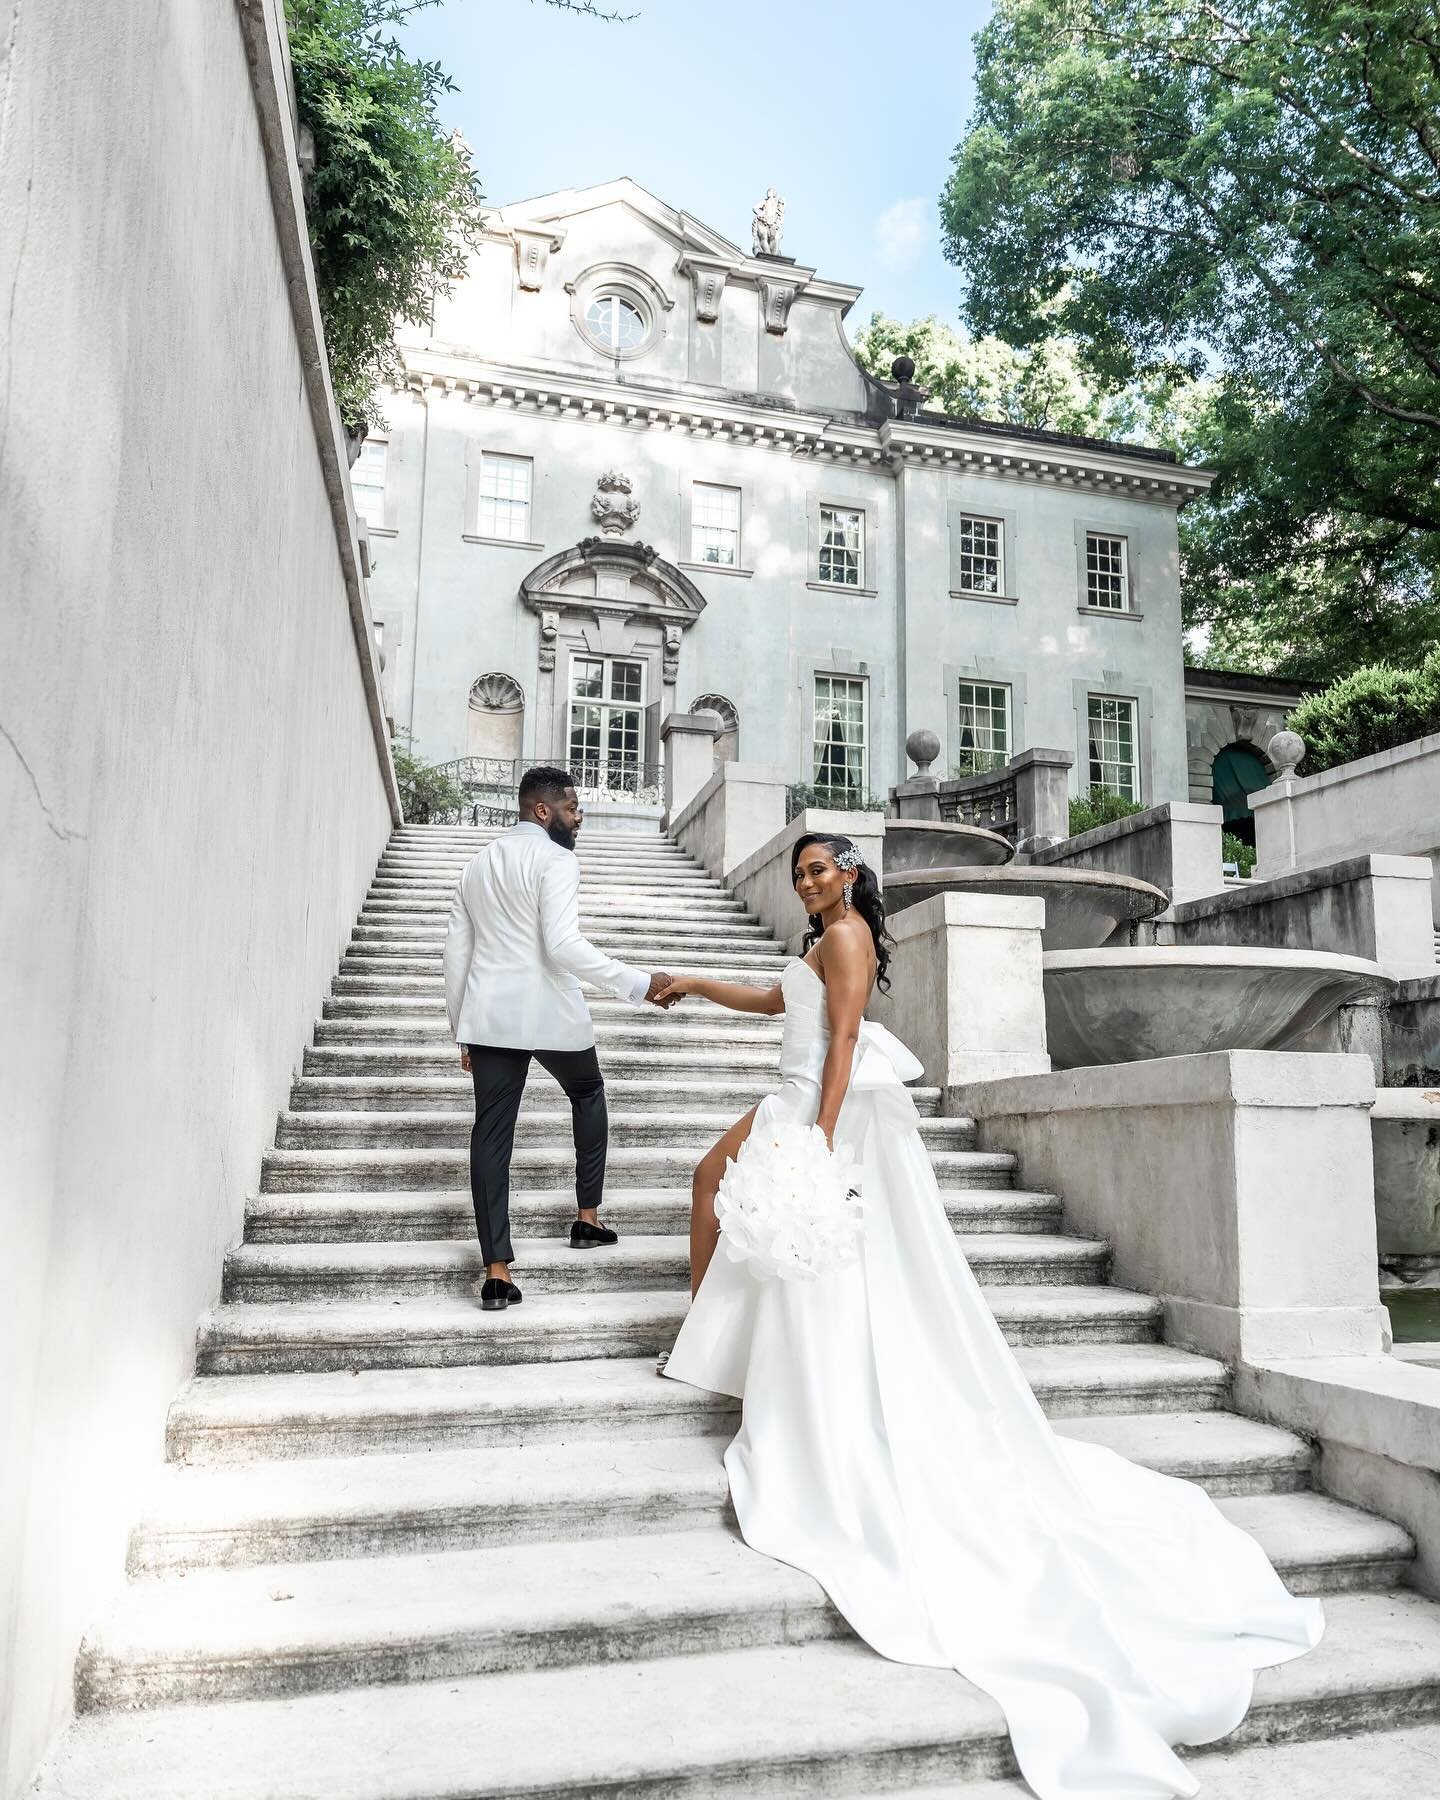 Congratulations to Mr. @stewyorkcity &amp; Mrs. @daudreycash Cornelius! 
Both of your wedding days were absolutely breathtaking. We&rsquo;re excited to share the entire story of this beautiful couple. Stay tuned!
. 
.
.
.
Photographer: @lajoyphotogra